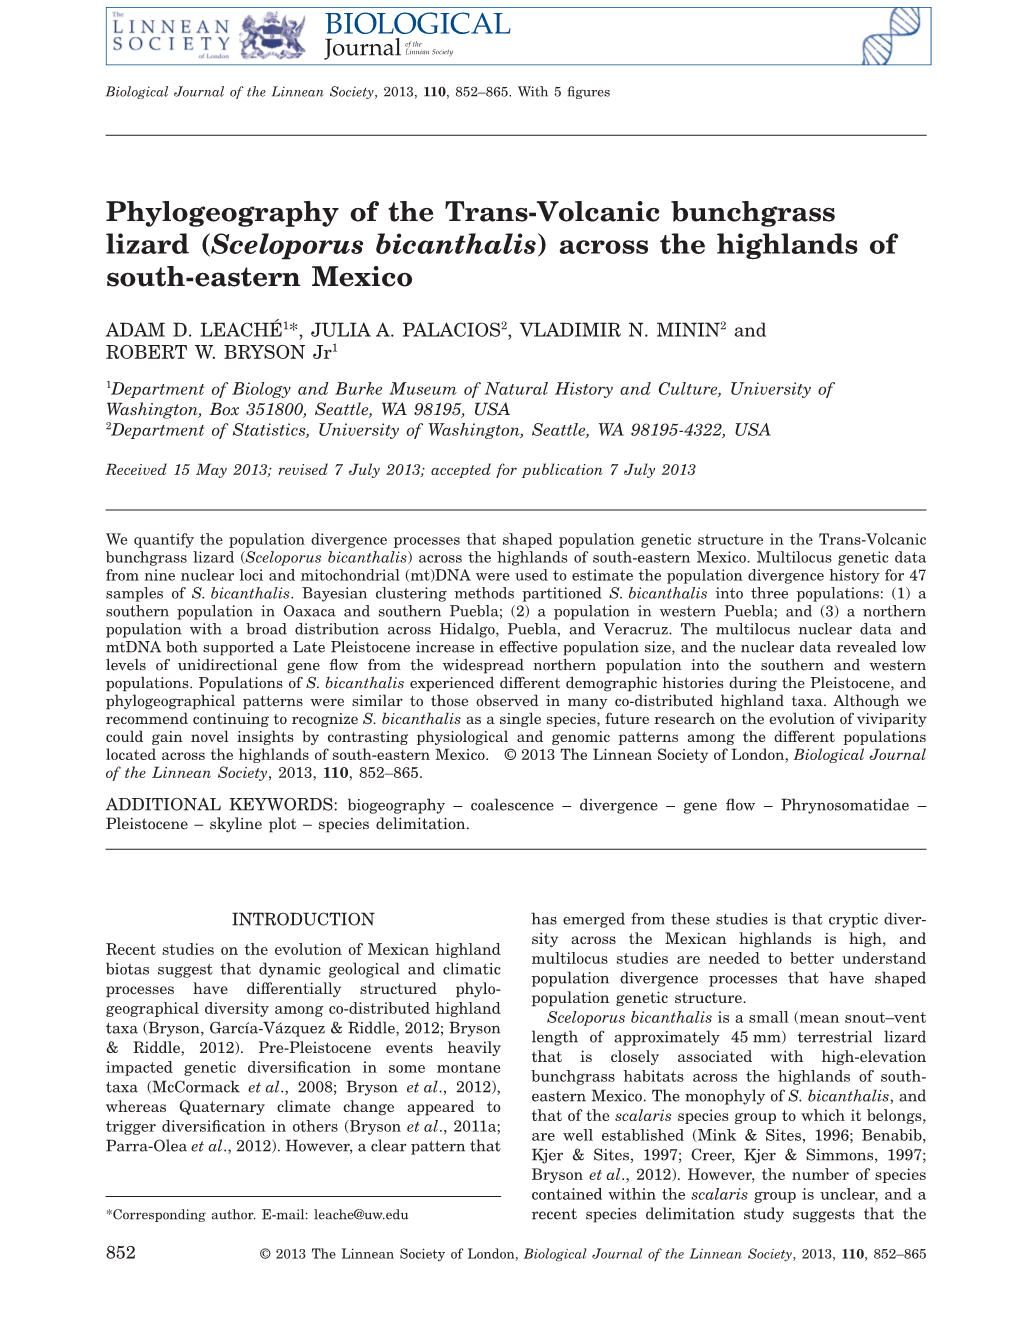 Phylogeography of the Transvolcanic Bunchgrass Lizard (Sceloporus Bicanthalis) Across the Highlands of Southeastern Mexico